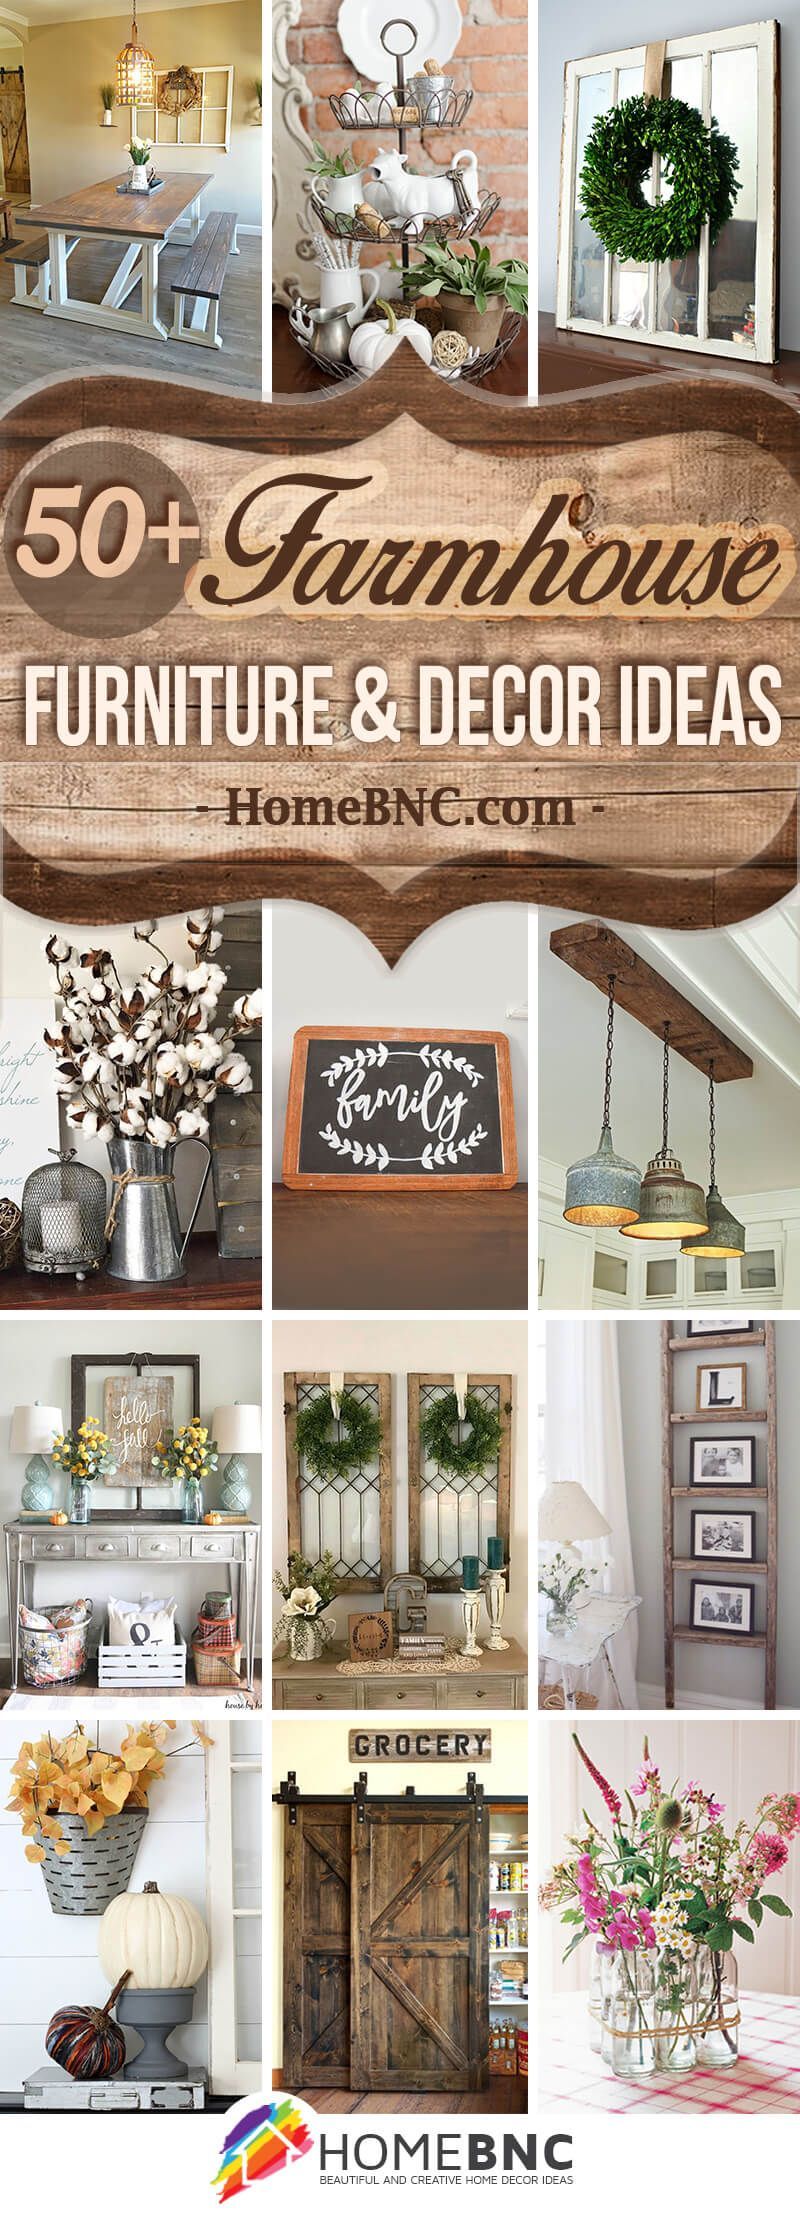 50+ Stunning Farmhouse Furniture and Decor Ideas to Turn Your Home into a Rustic Getaway Spot -   24 vintage rustic decor
 ideas